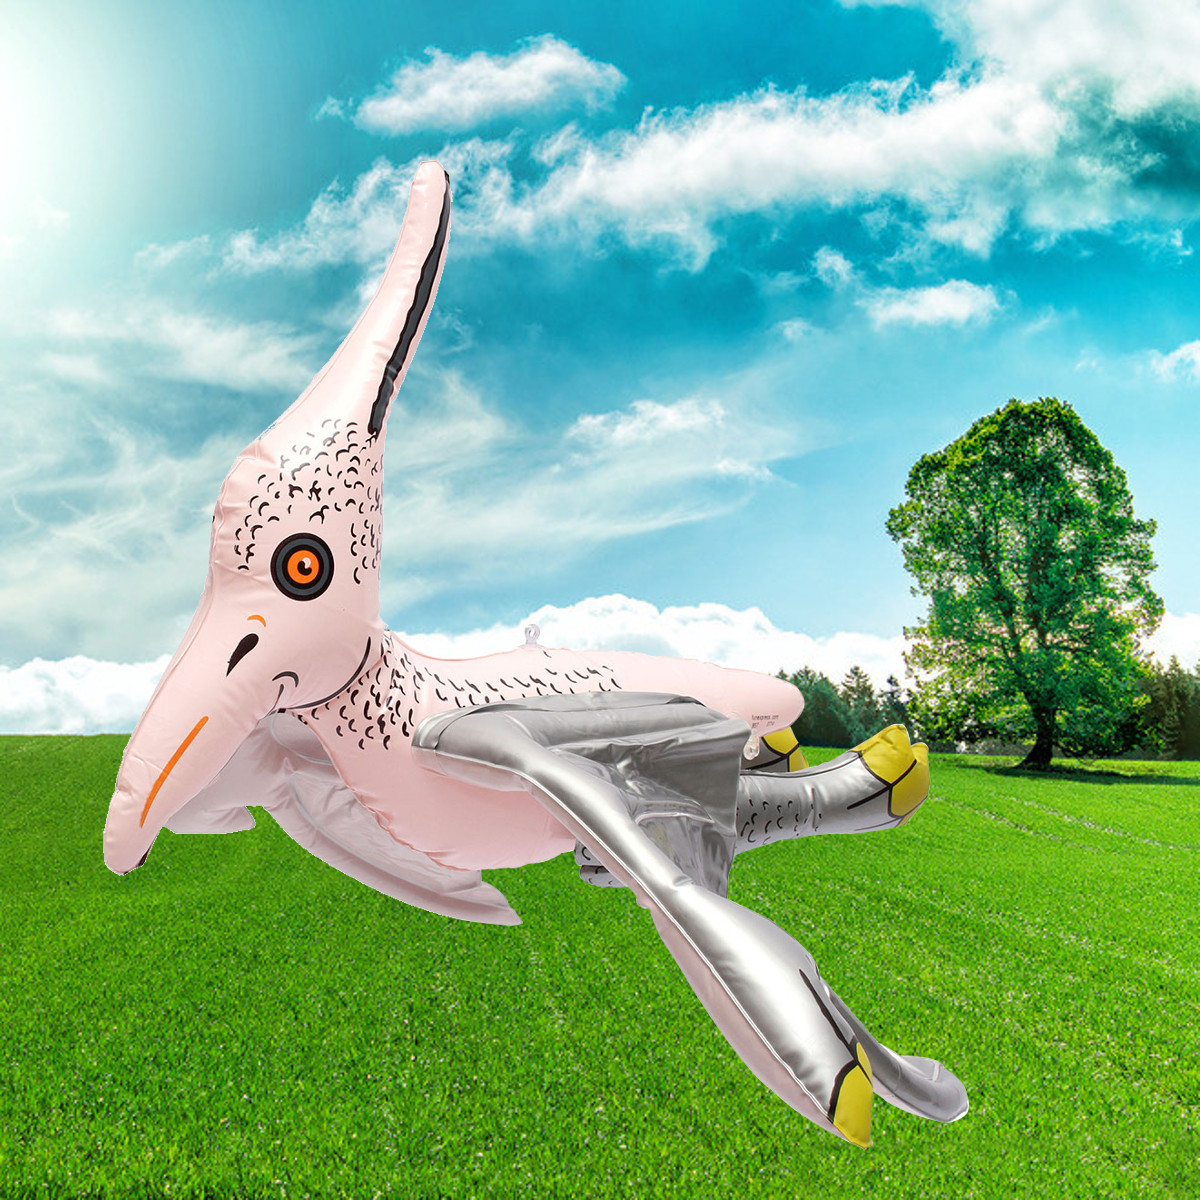 

Pterosaur Dinosaur Inflatable Blow Up Toy Children Party Gift Decor